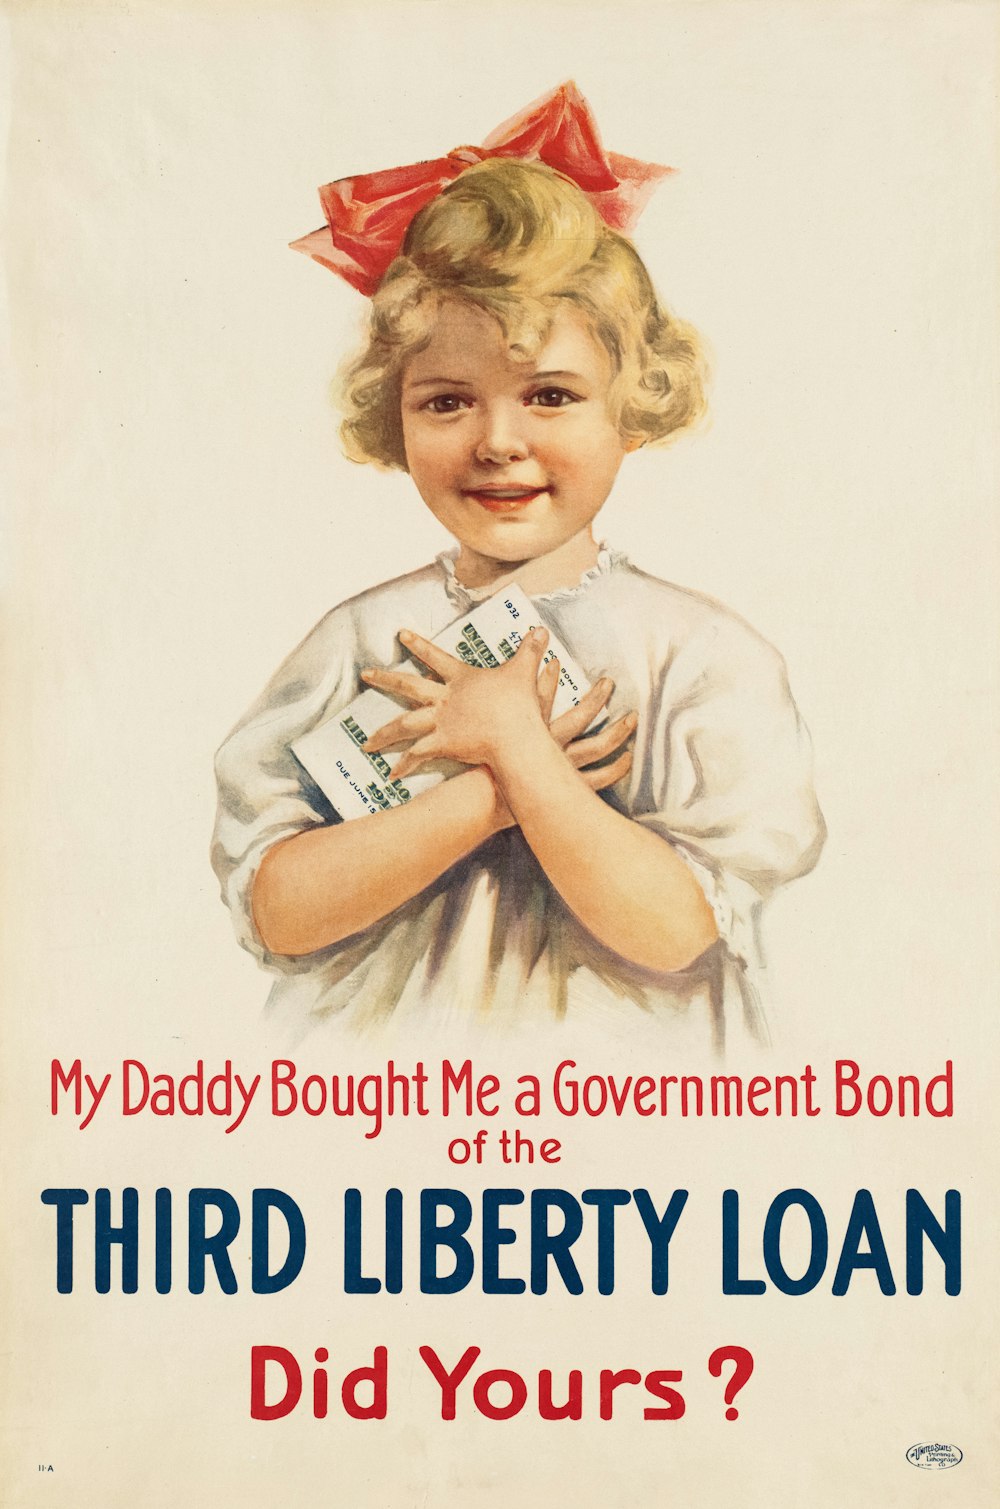 a poster of a little girl holding a bottle of liberty loan